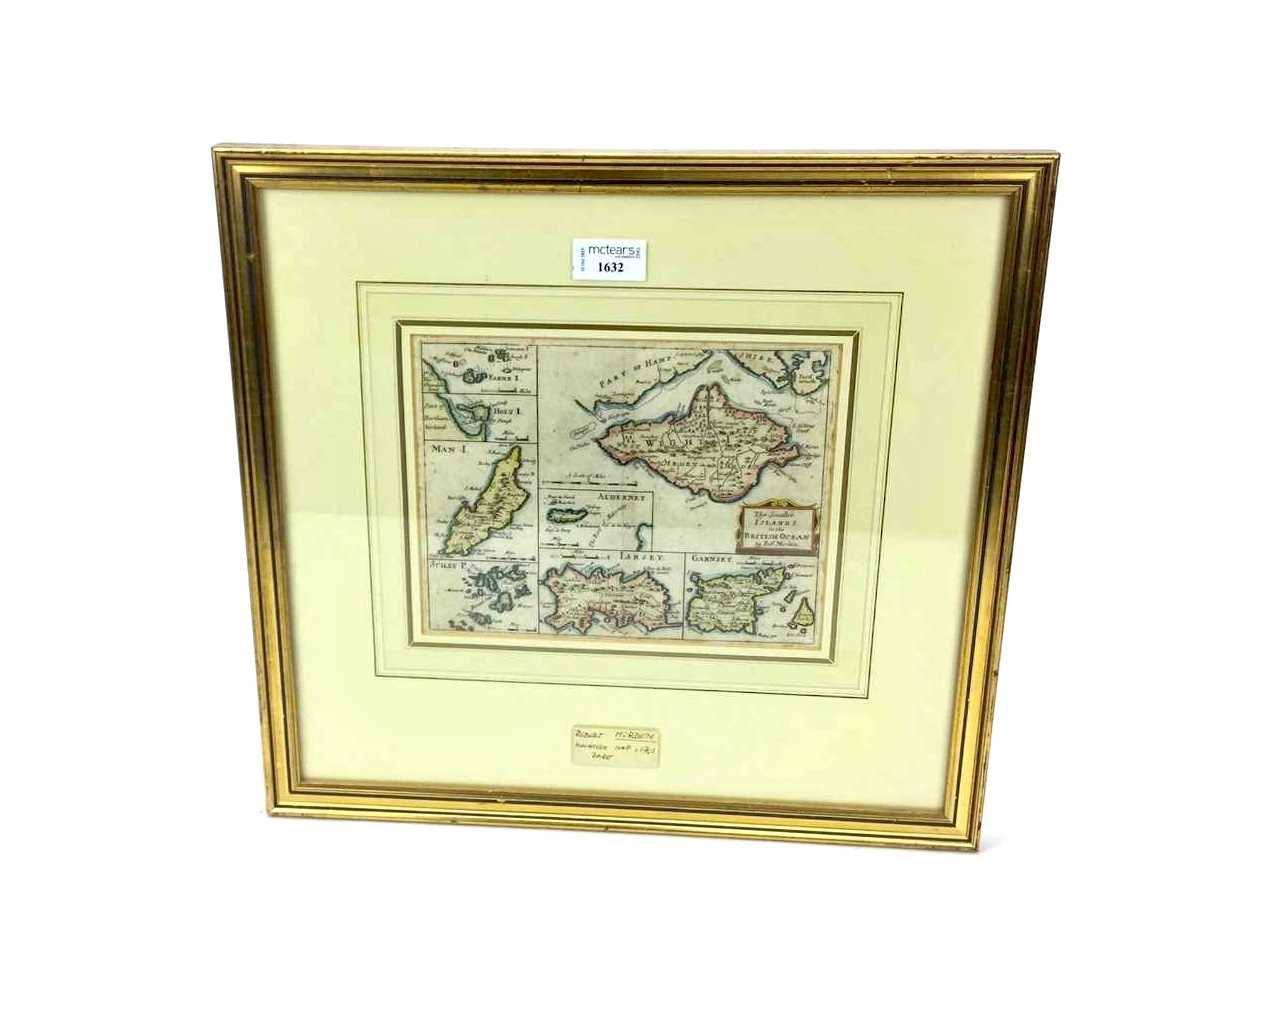 Lot 51 - A MAP OF THE CHANNEL ISLANDS, BY ROBERT MORDEN